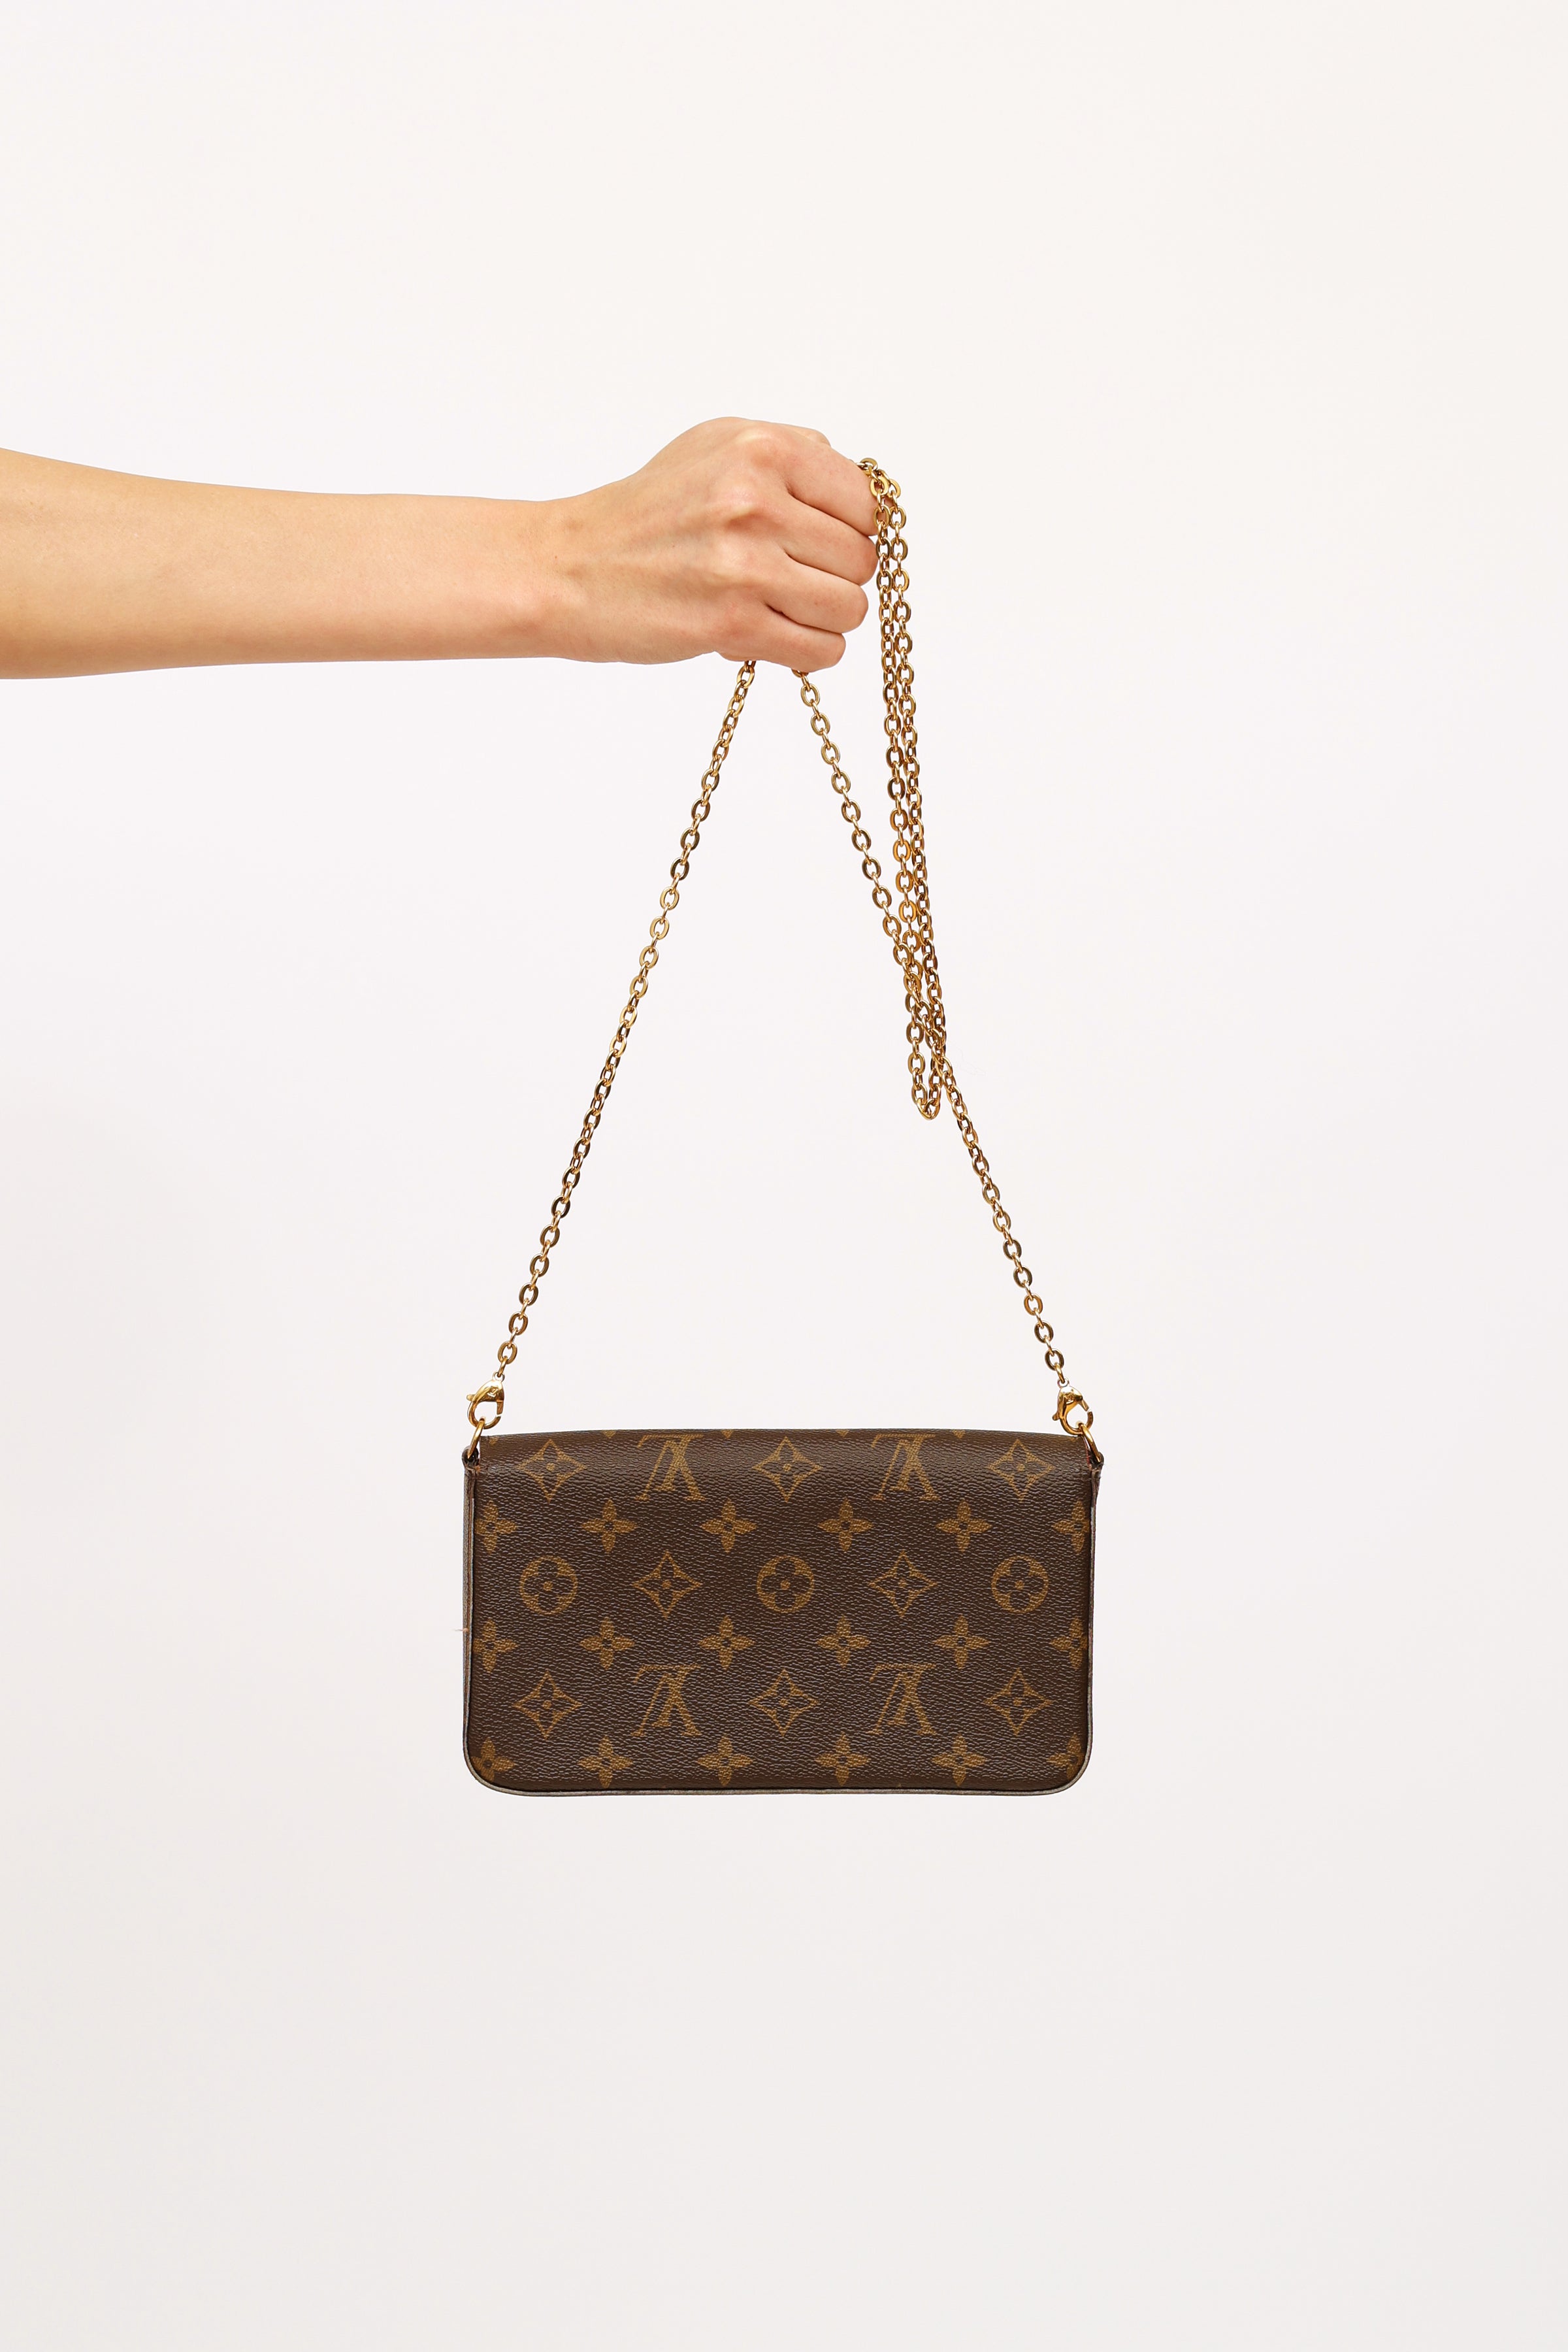 The Pochette Felicie Club!  Louis vuitton outfit, Branded outfits